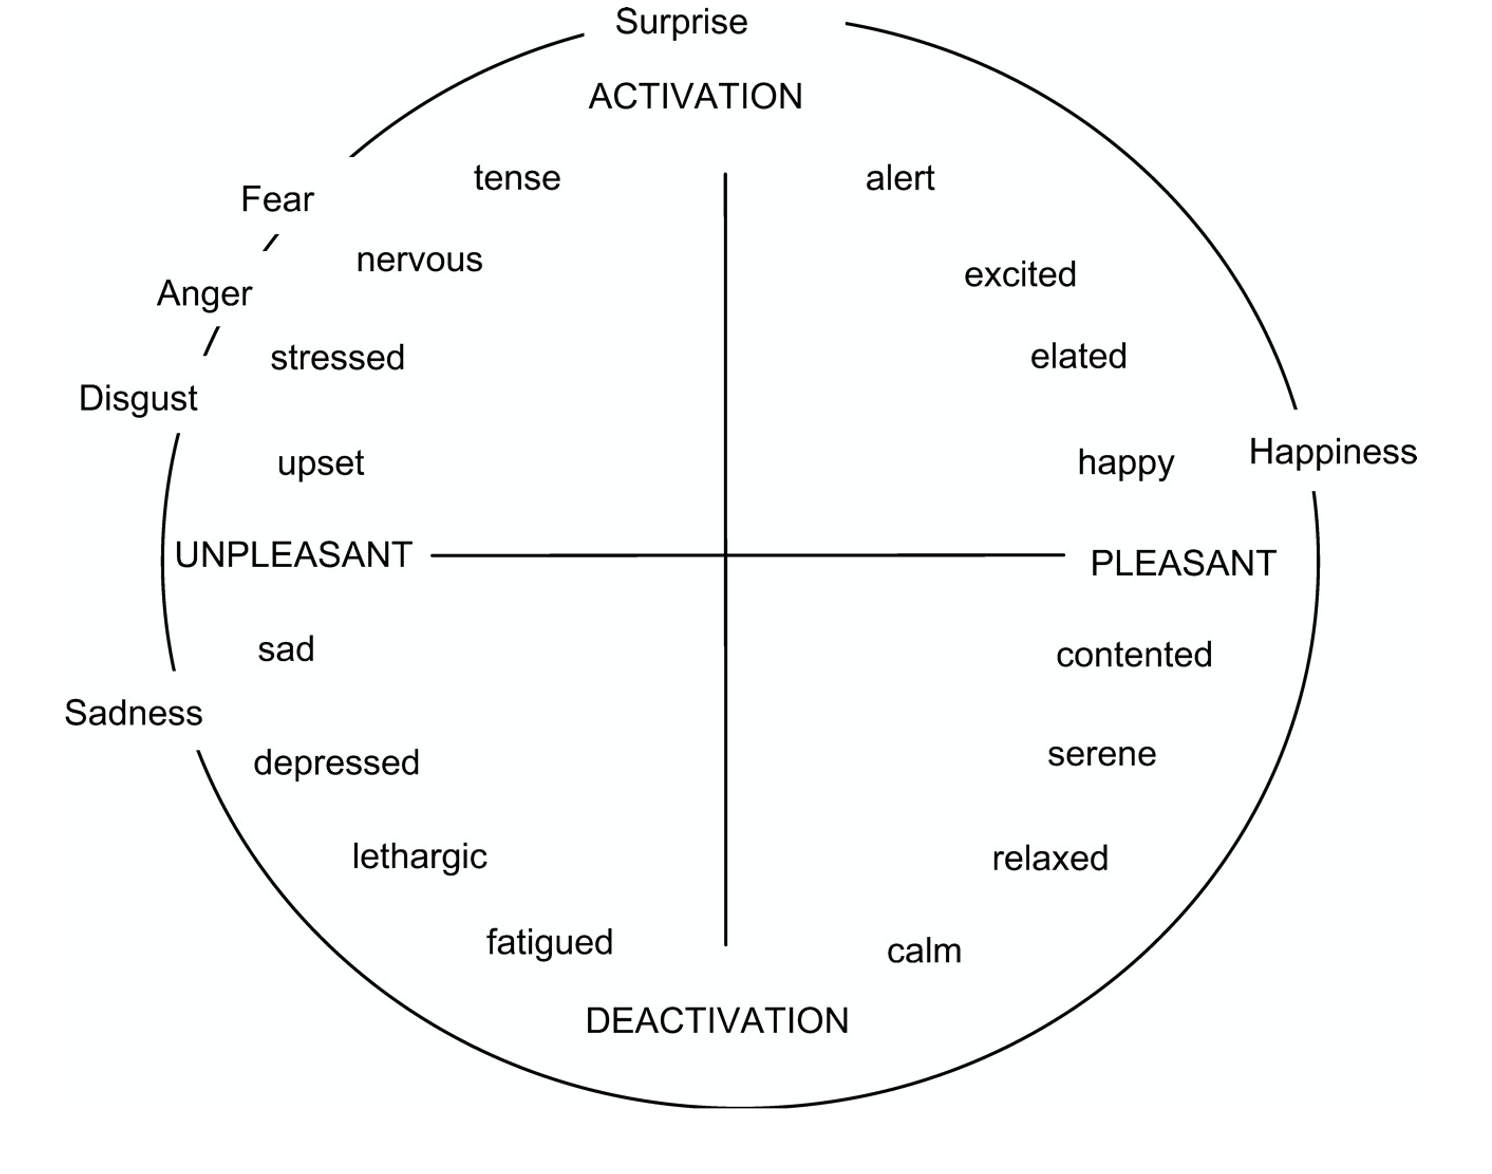 A circumplex model with unipolar scales for activation and pleasantness which separate the circle into four quadrents. Above activation is surprise, and in the upper right quadrent (betwen activation and pleasant) there is alert, excited, elated, and happy, in the bottom right quadrent (between pleasant and deactivation) there is contented, serene, relaxed, and calm. In the bottom left quadrent (between deactivation and unpleasant) there is sad, depressed, lethargic, and fatigued. In the upper left quadrent (between unpleasant and activation) there is upset, stressed, nervous, and tense.